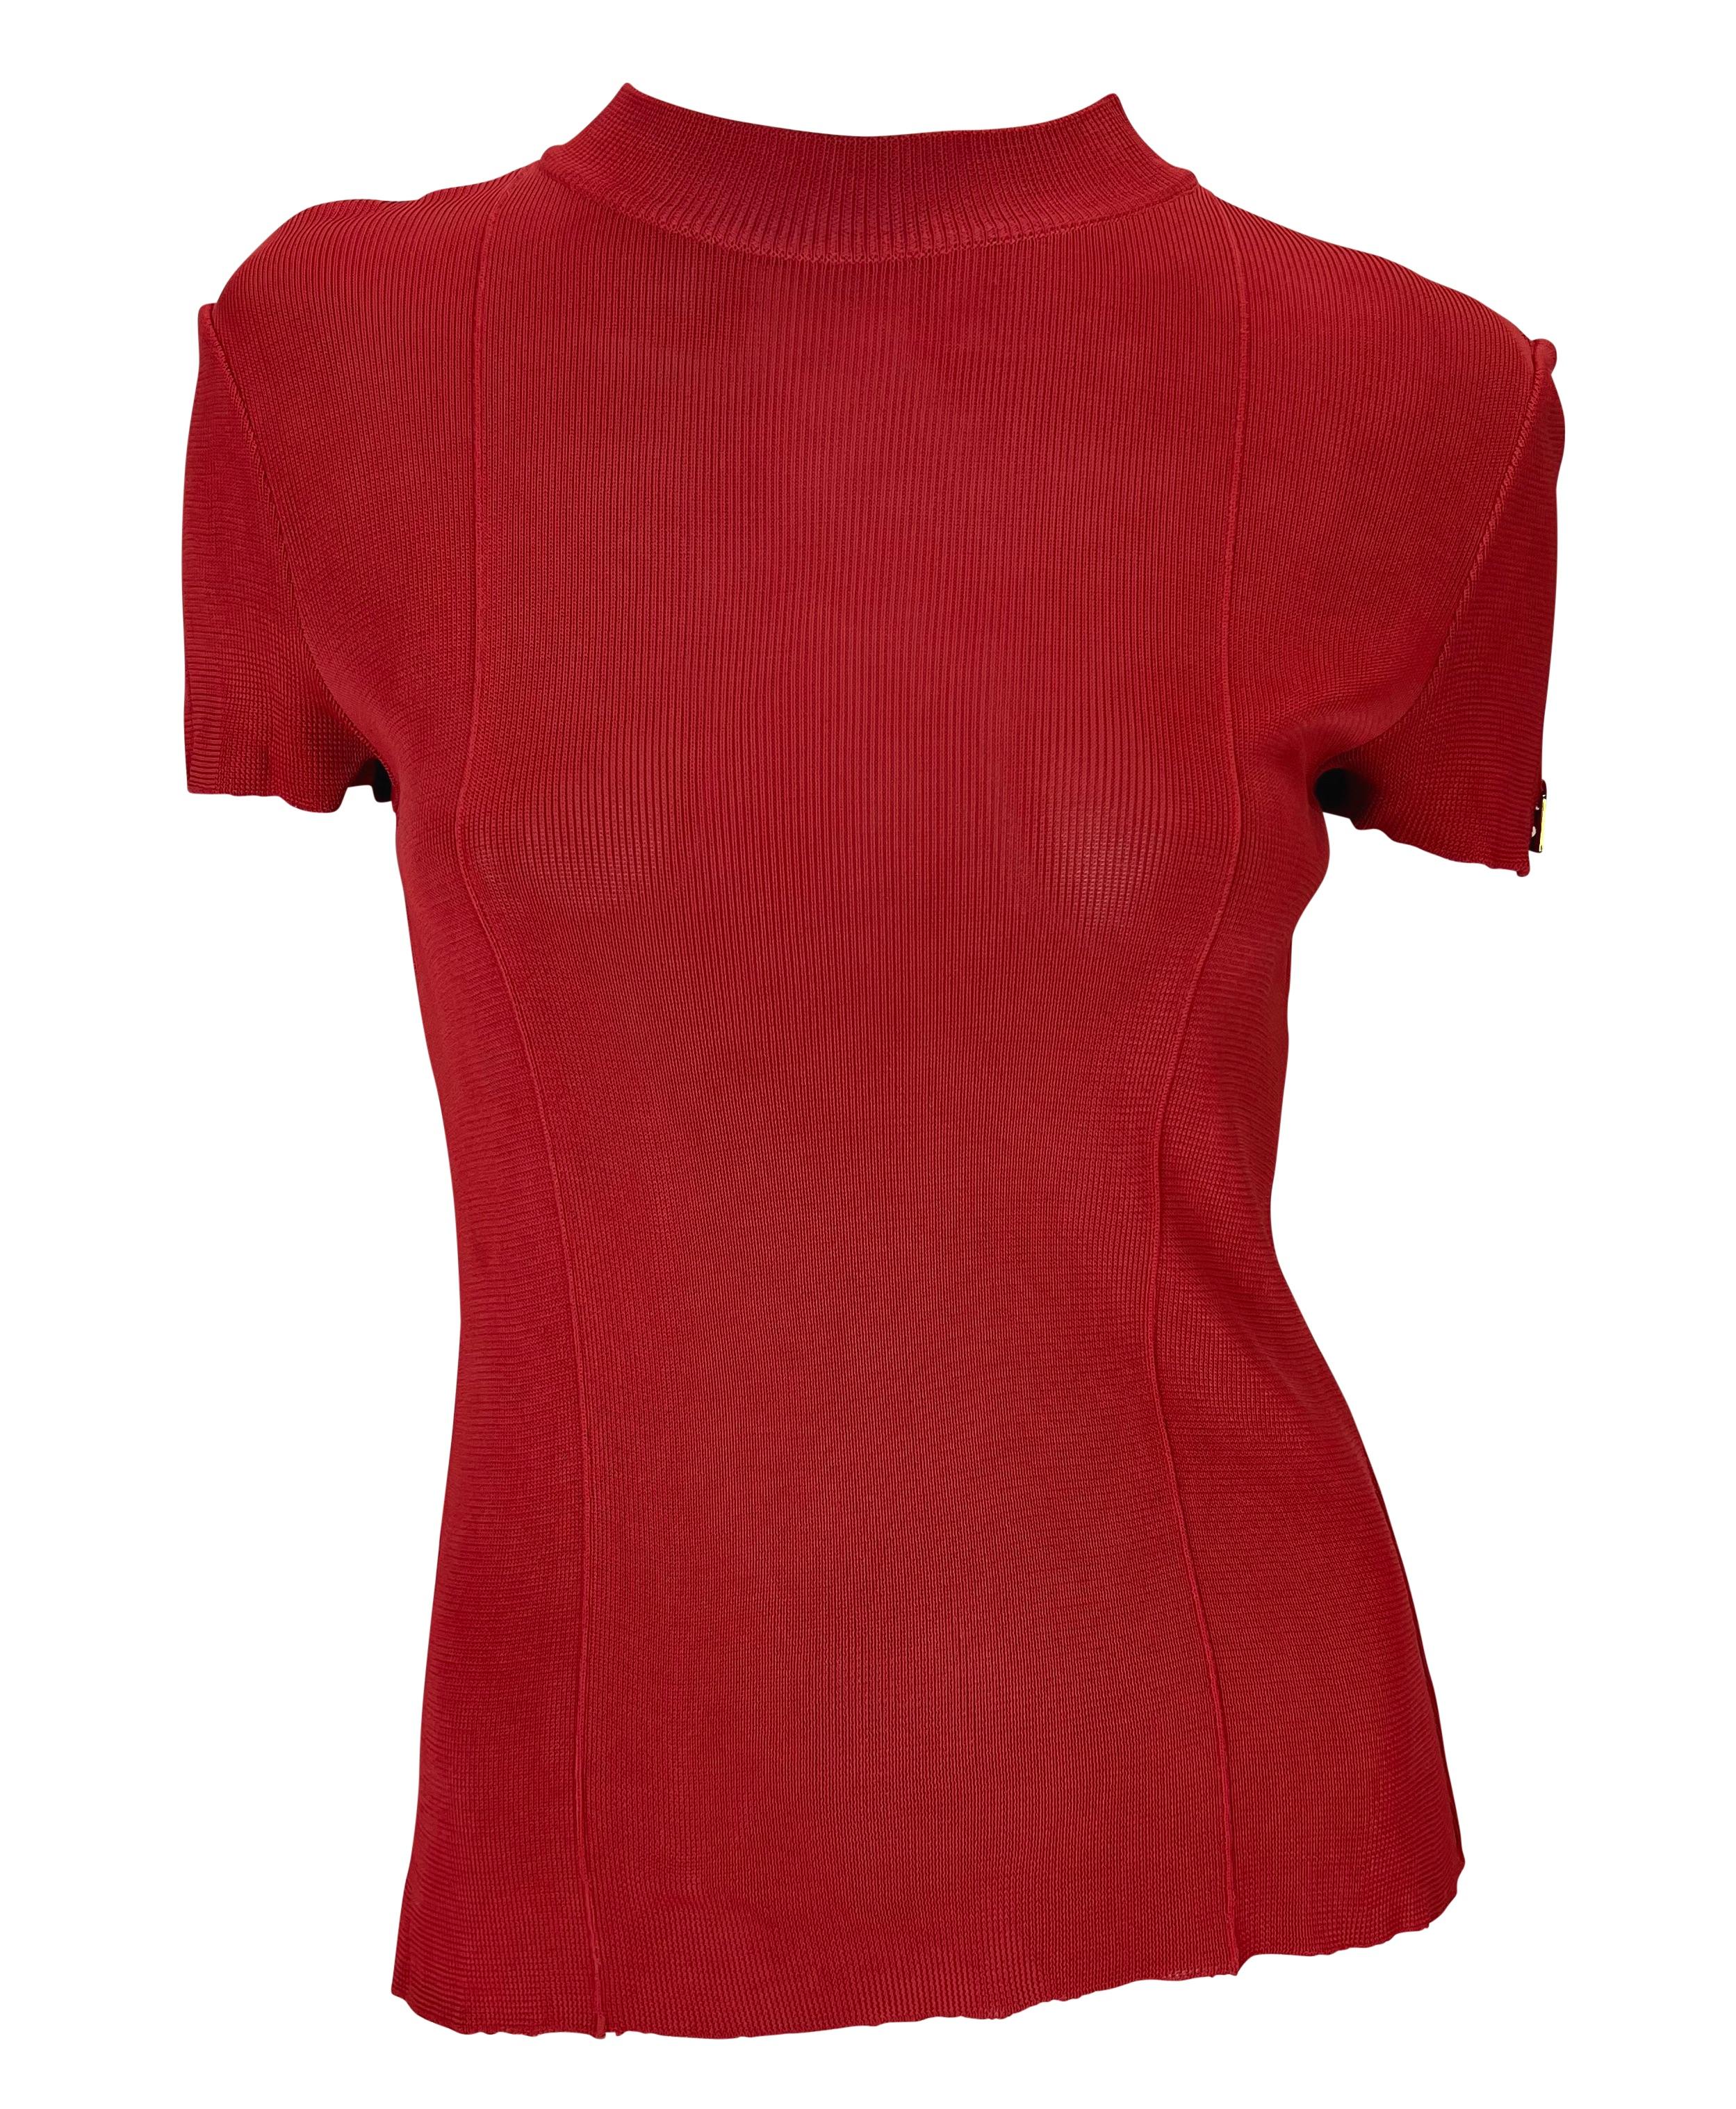 S/S 1997 Gucci by Tom Ford Red G Logo Medallion Viscose Stretch Knit Top For Sale 1